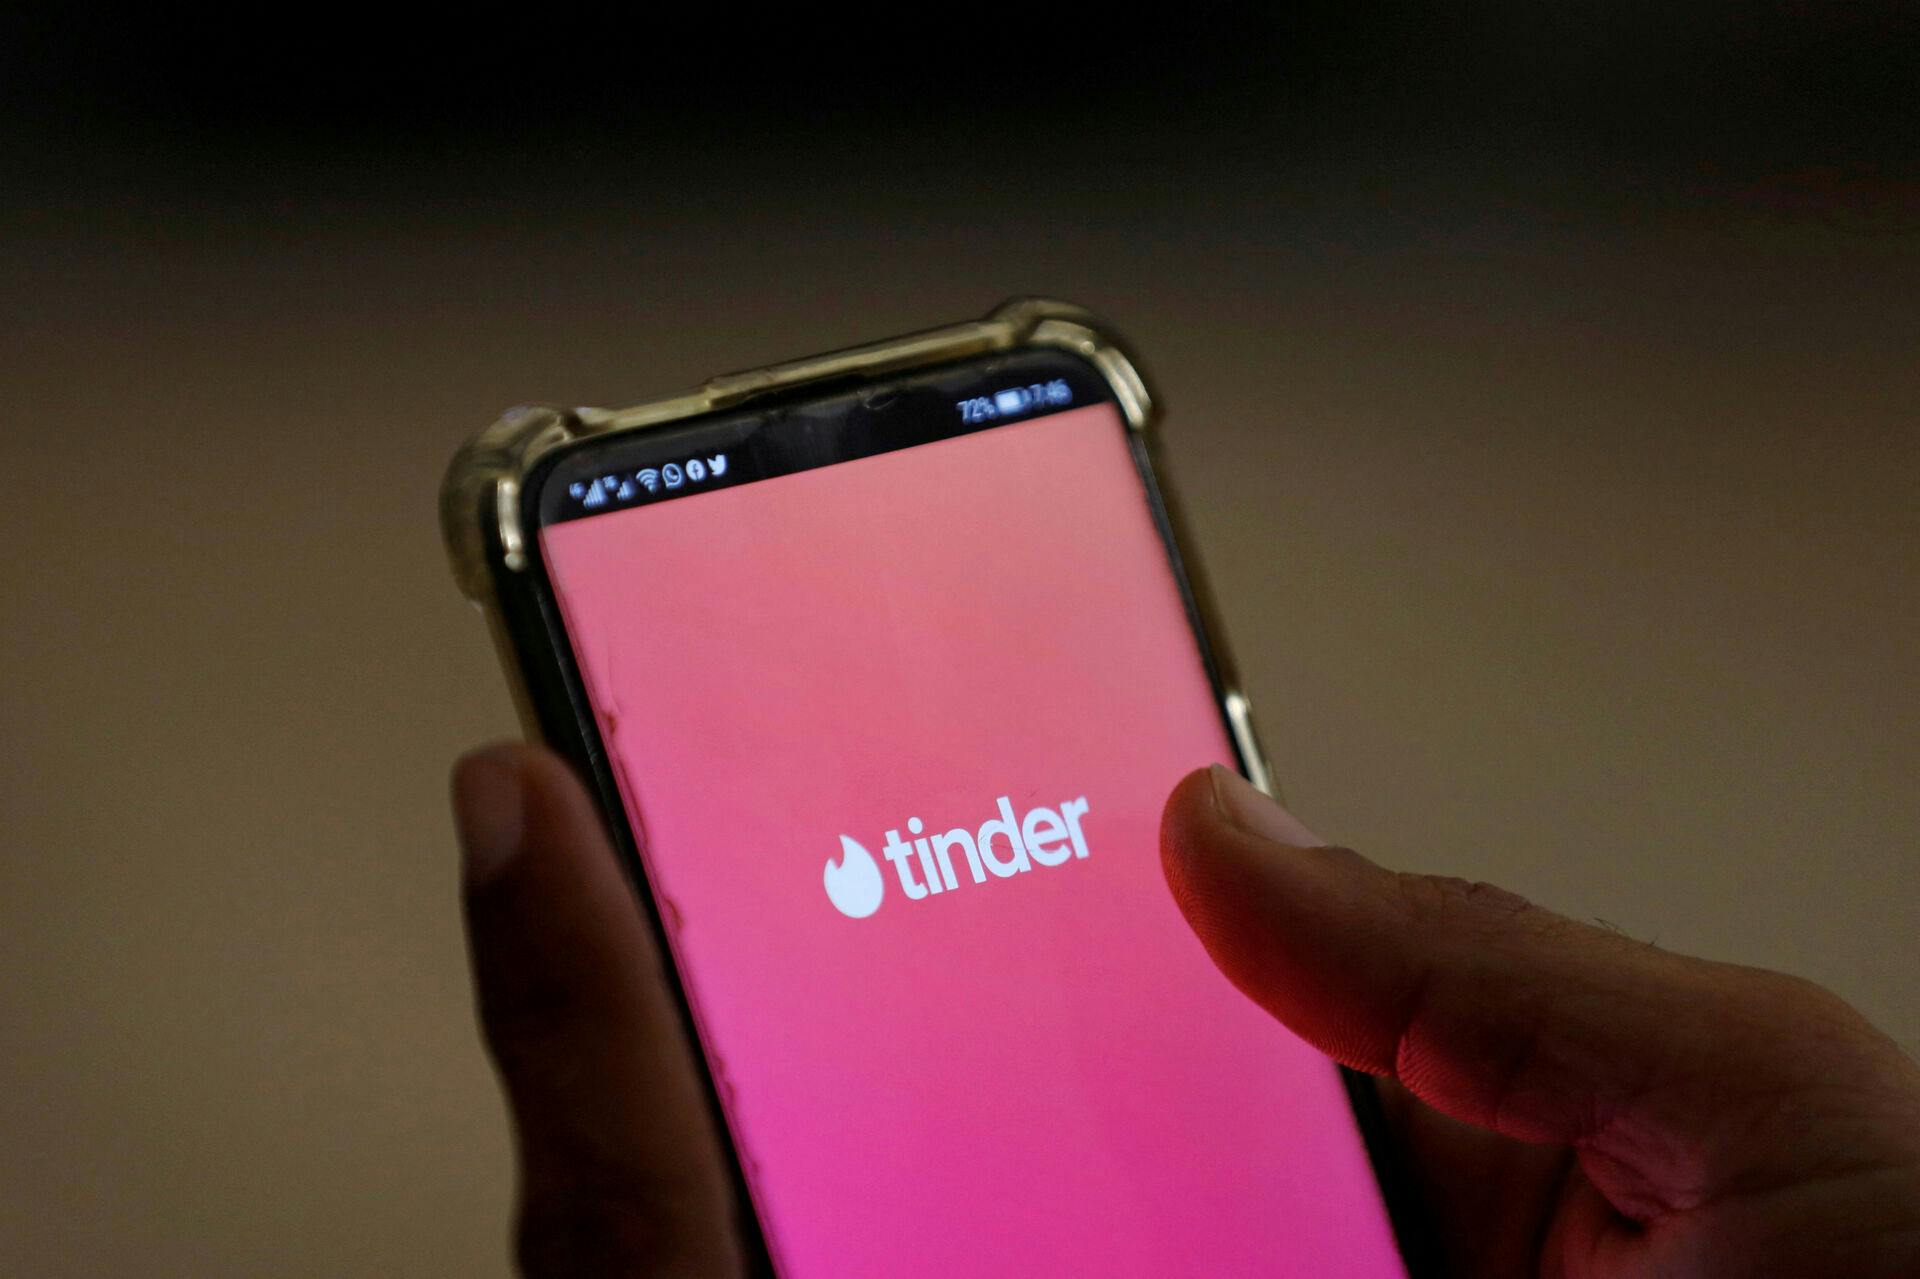 FILE PHOTO: The dating app Tinder is shown on a mobile phone in this picture illustration taken September 1, 2020. REUTERS/Akhtar Soomro/Illustration/File Photo